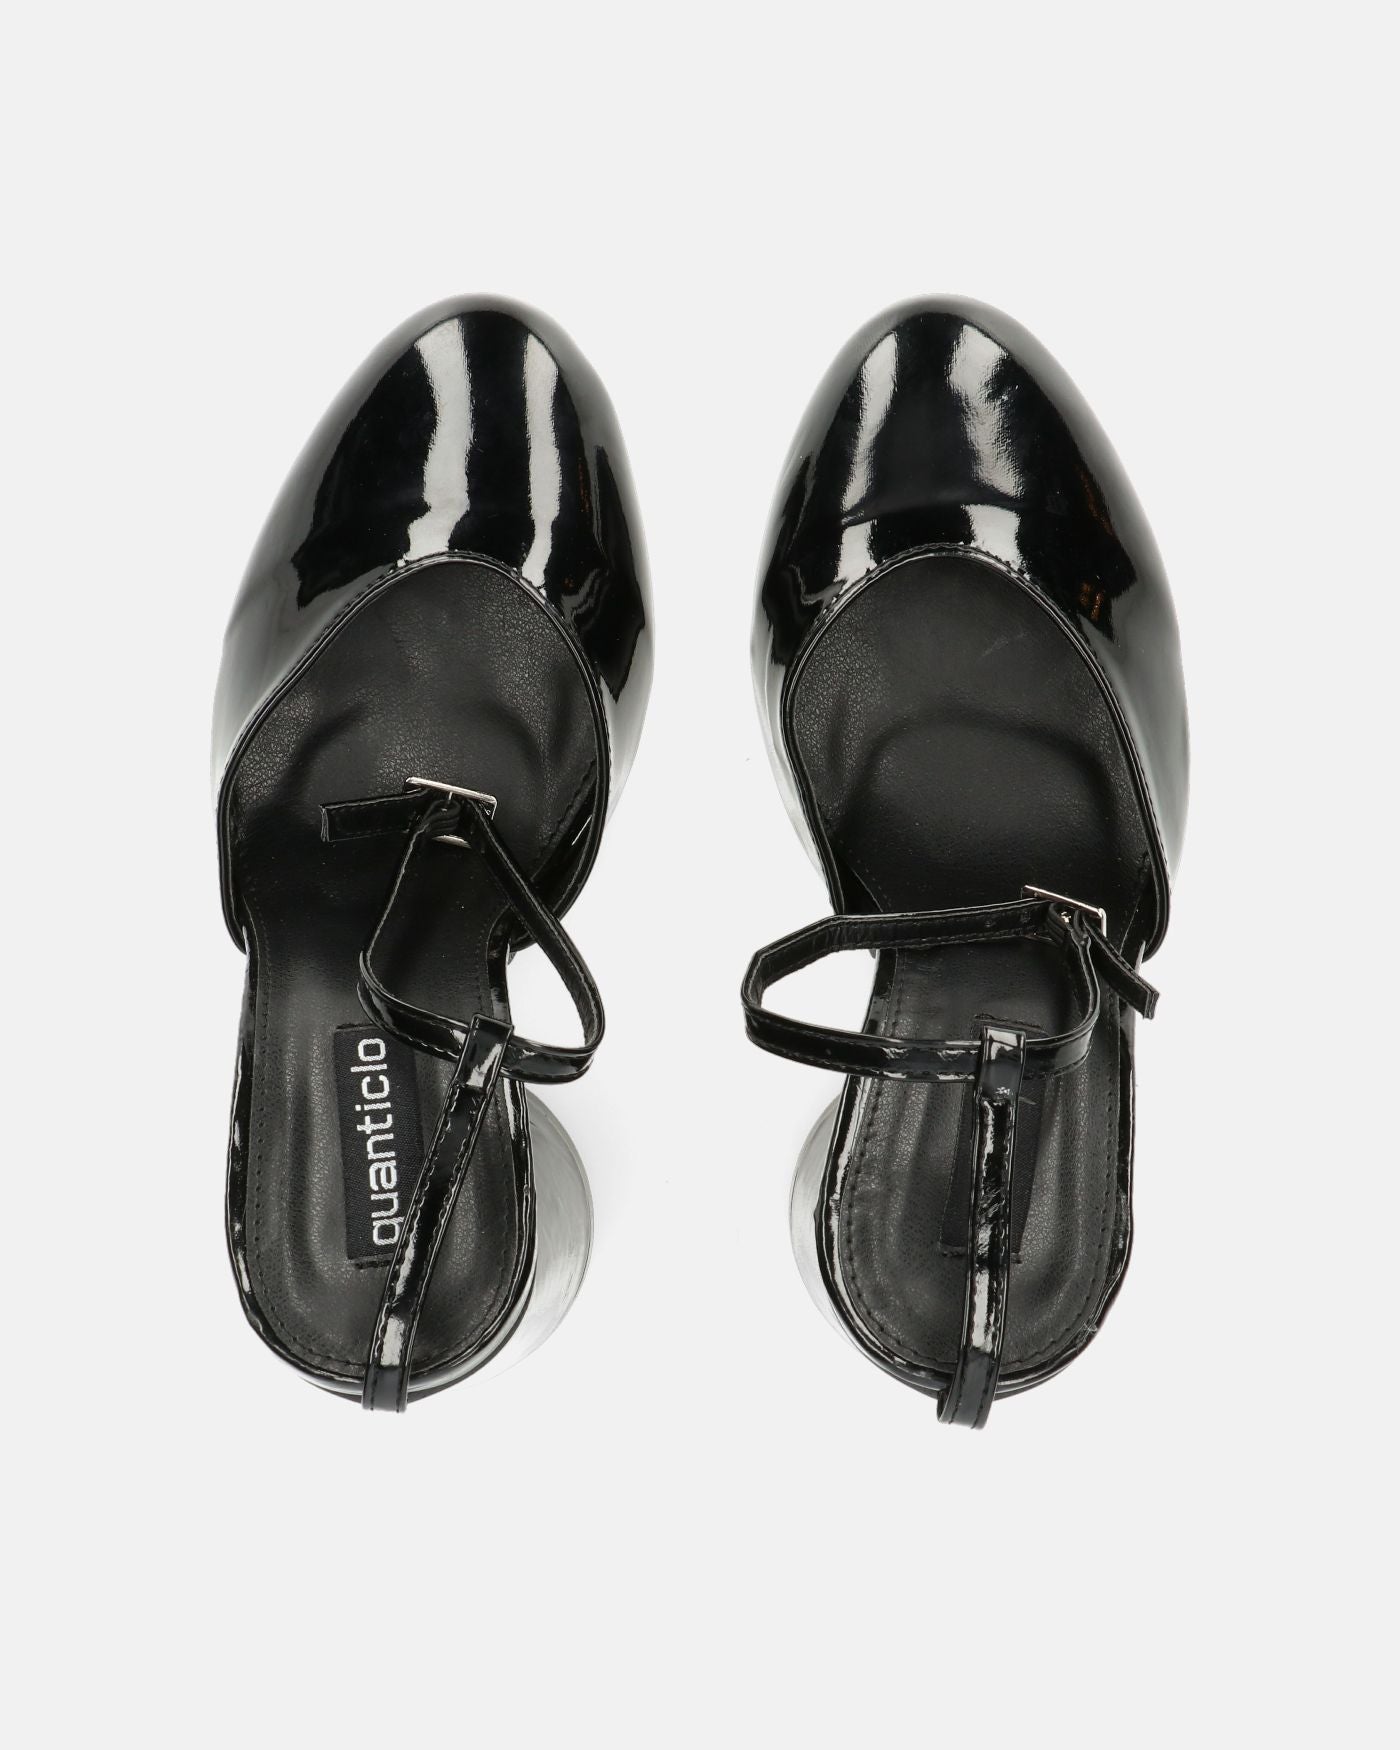 MAYBELLE - black glassy sandals with cylindrical heel